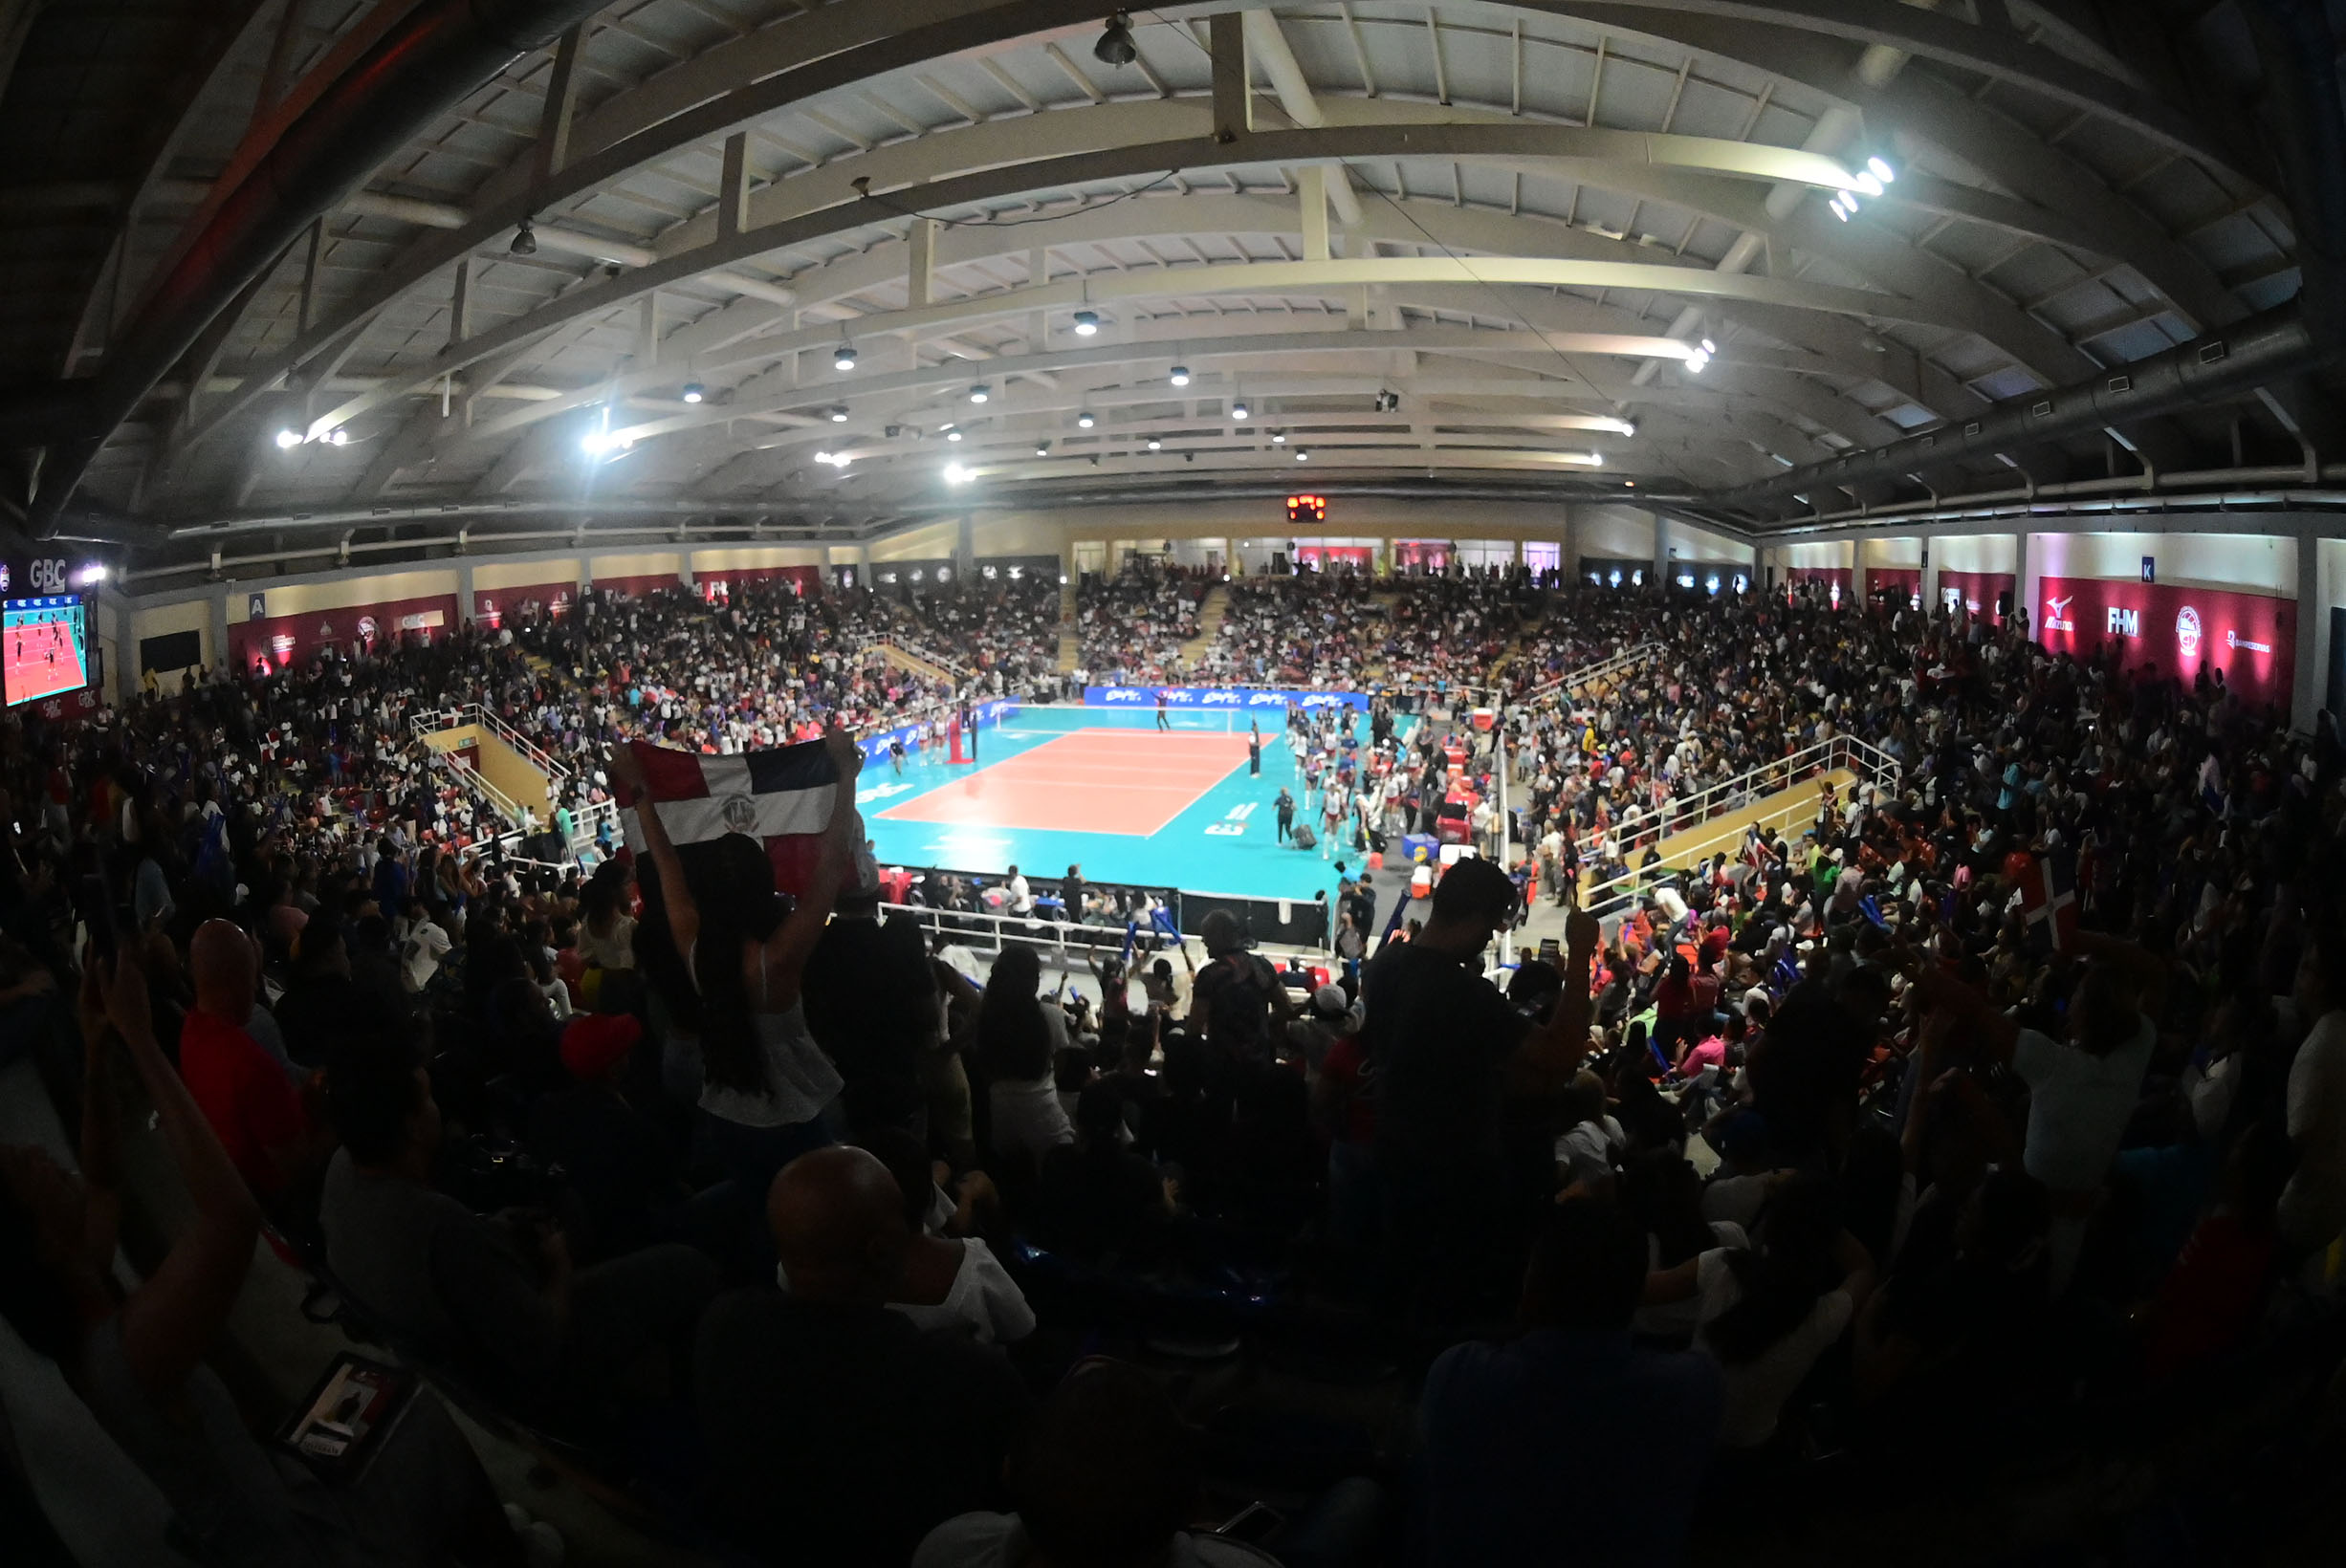 Historic Attendance for the Gold Medal Match at the NORCECA Final Six